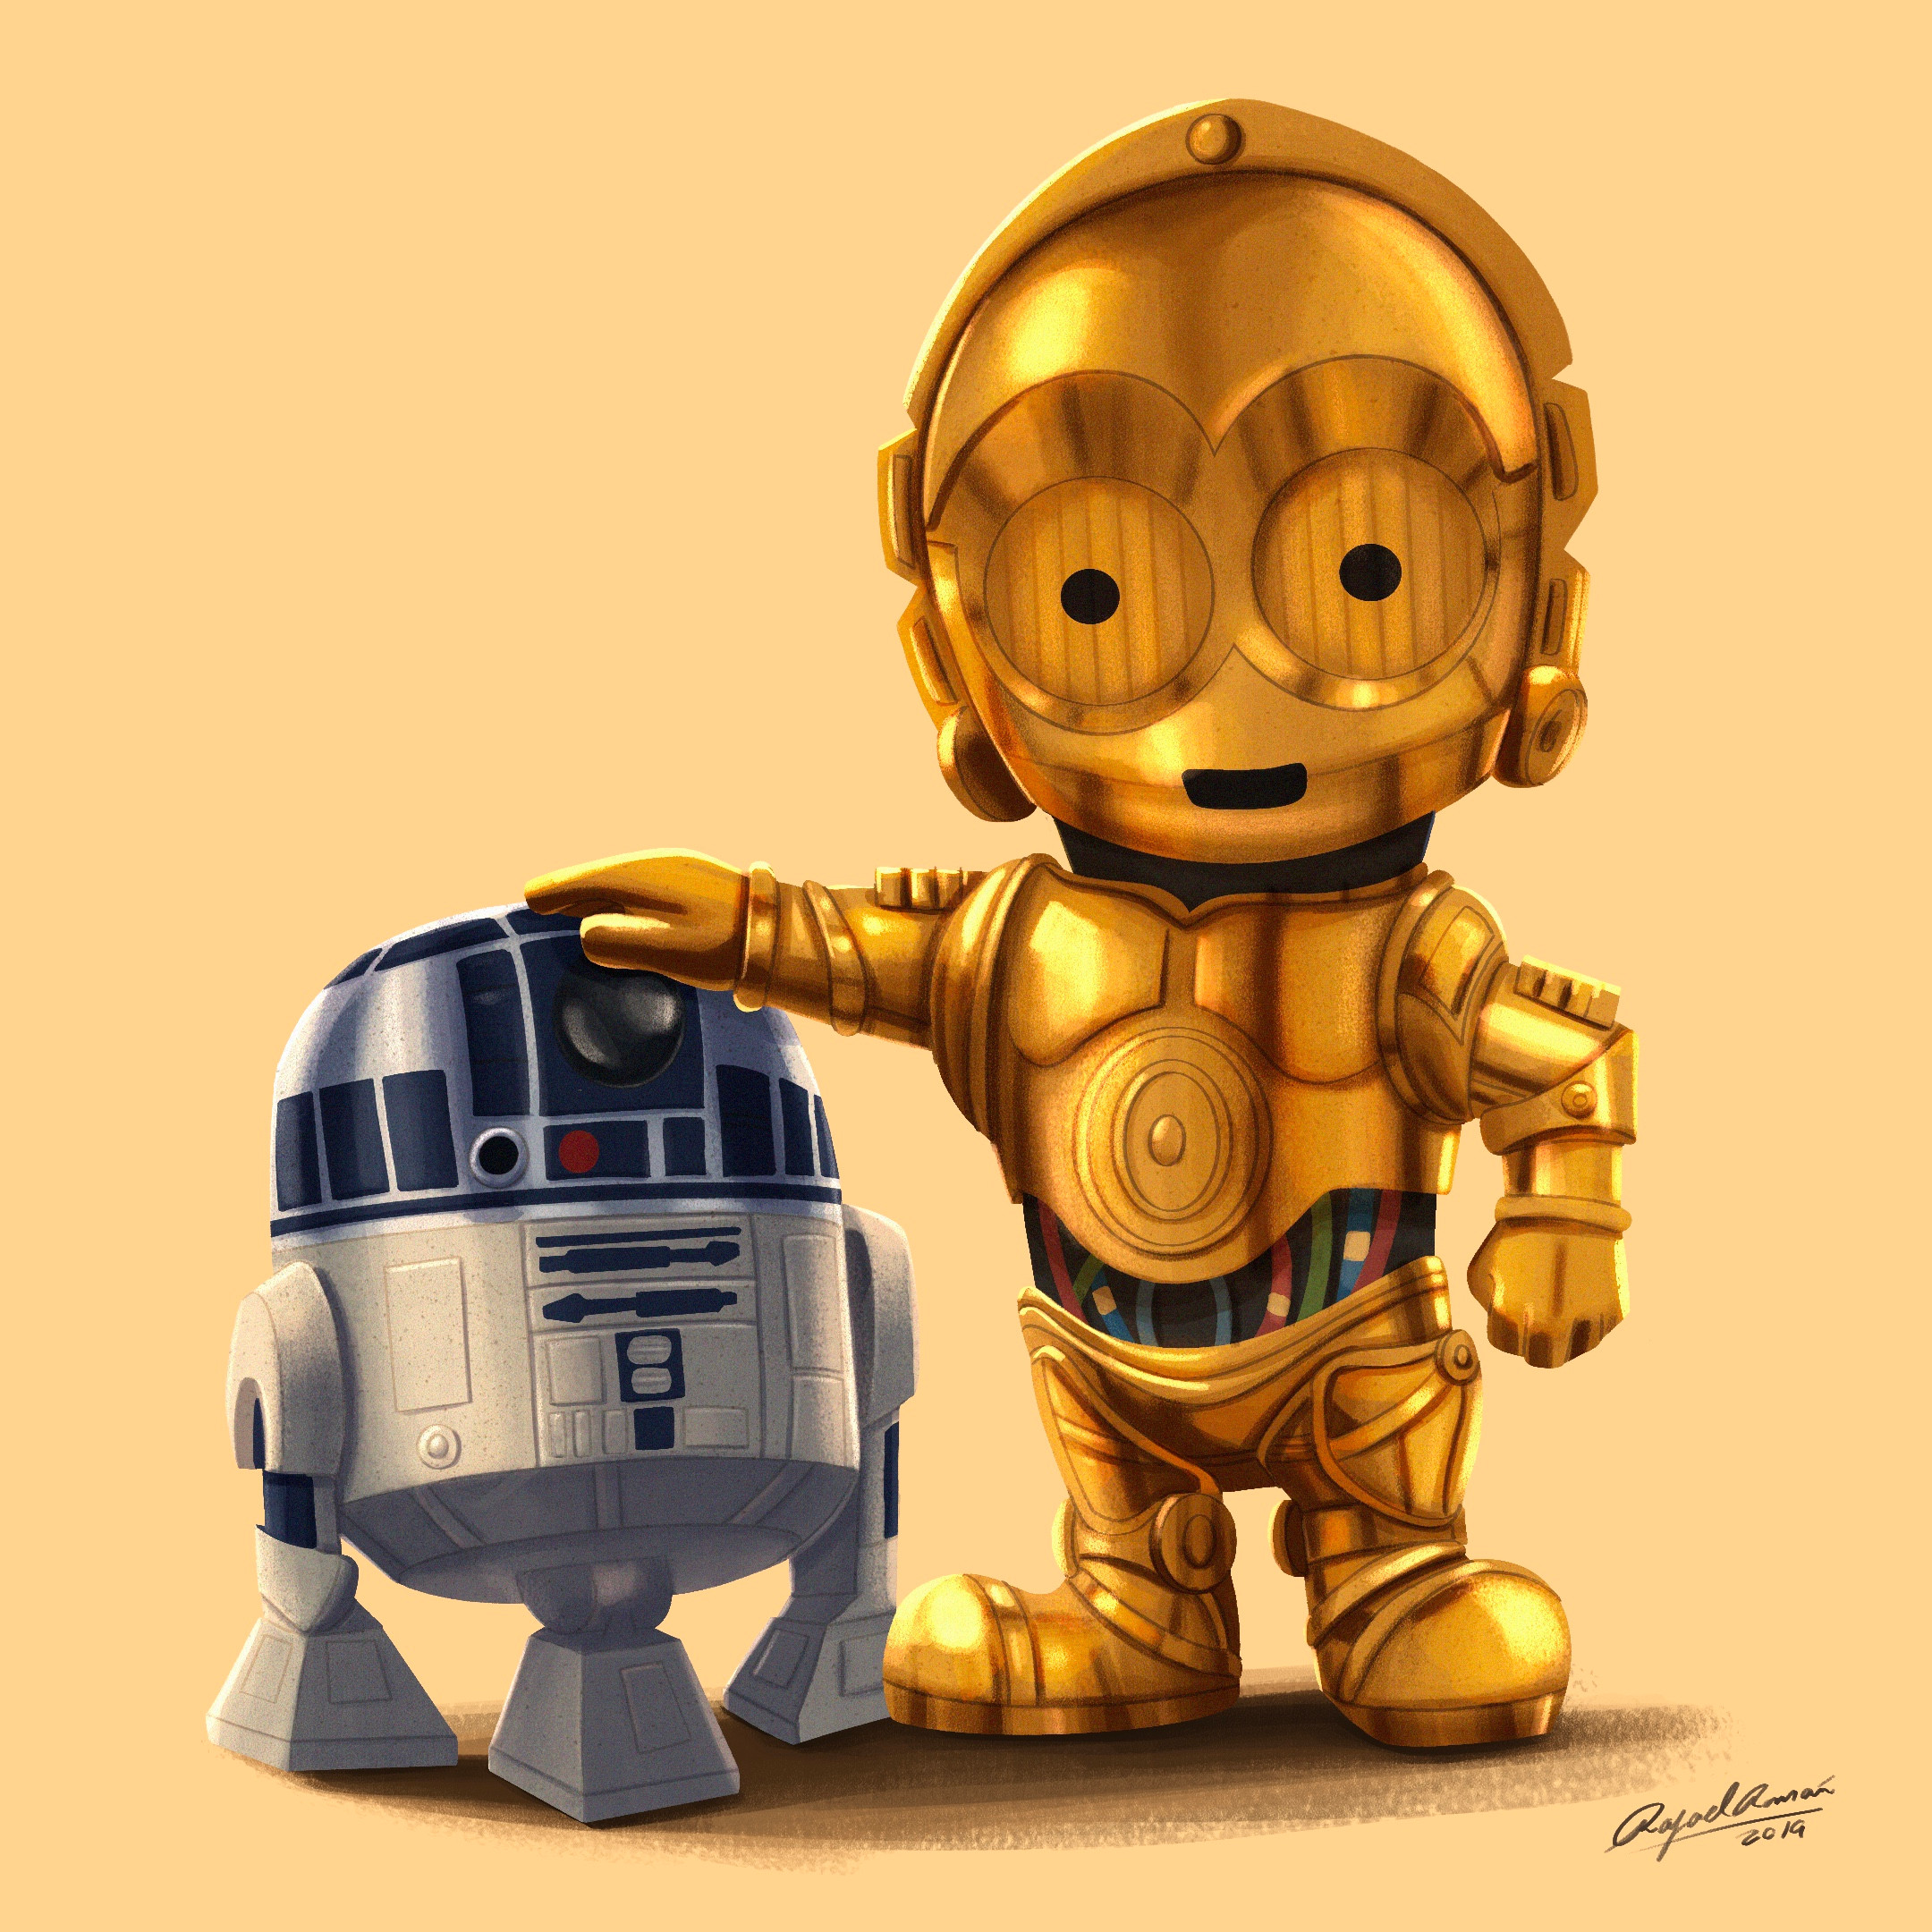 Day 12: Droid!